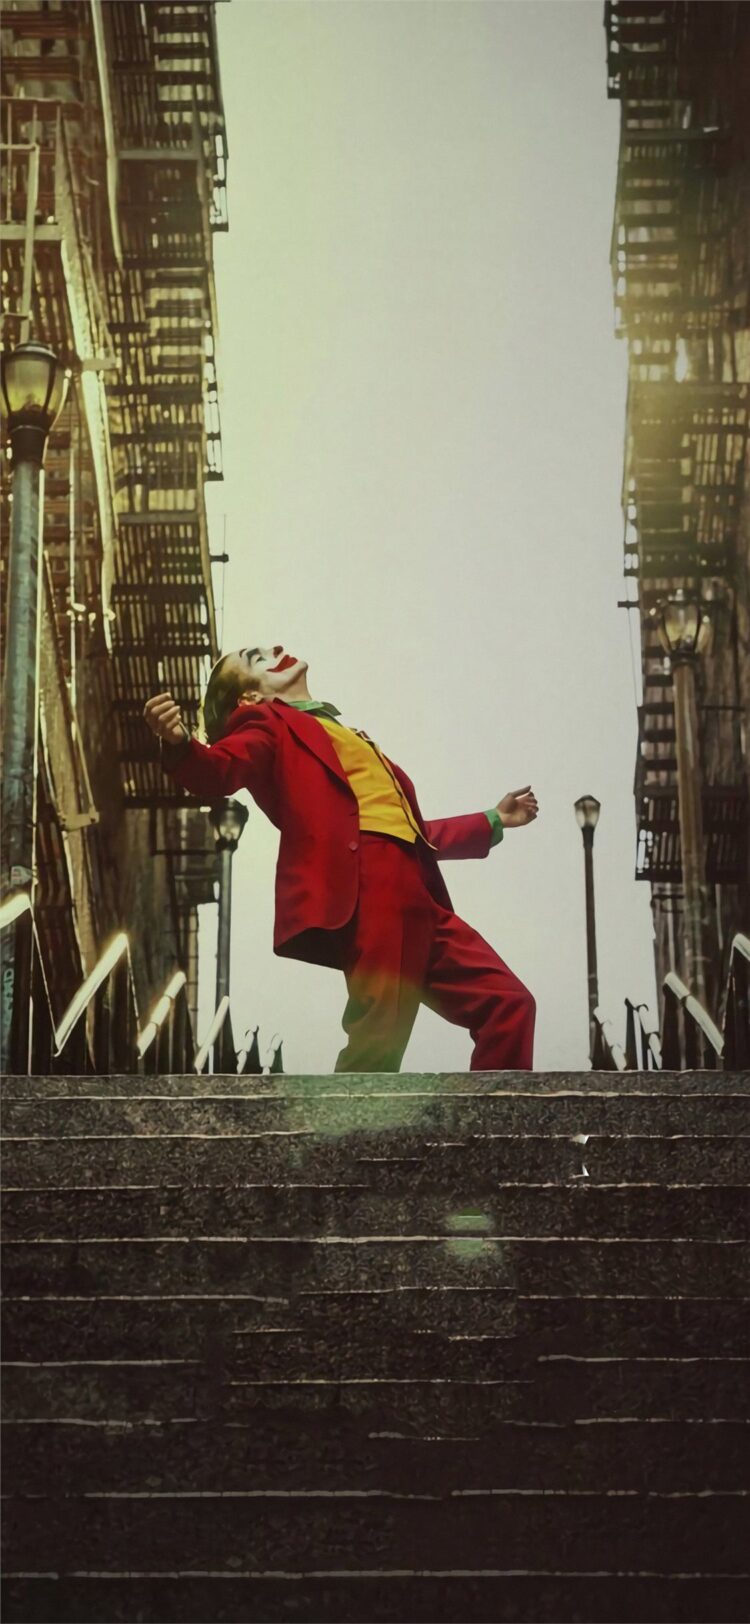 Joker Stairs Images